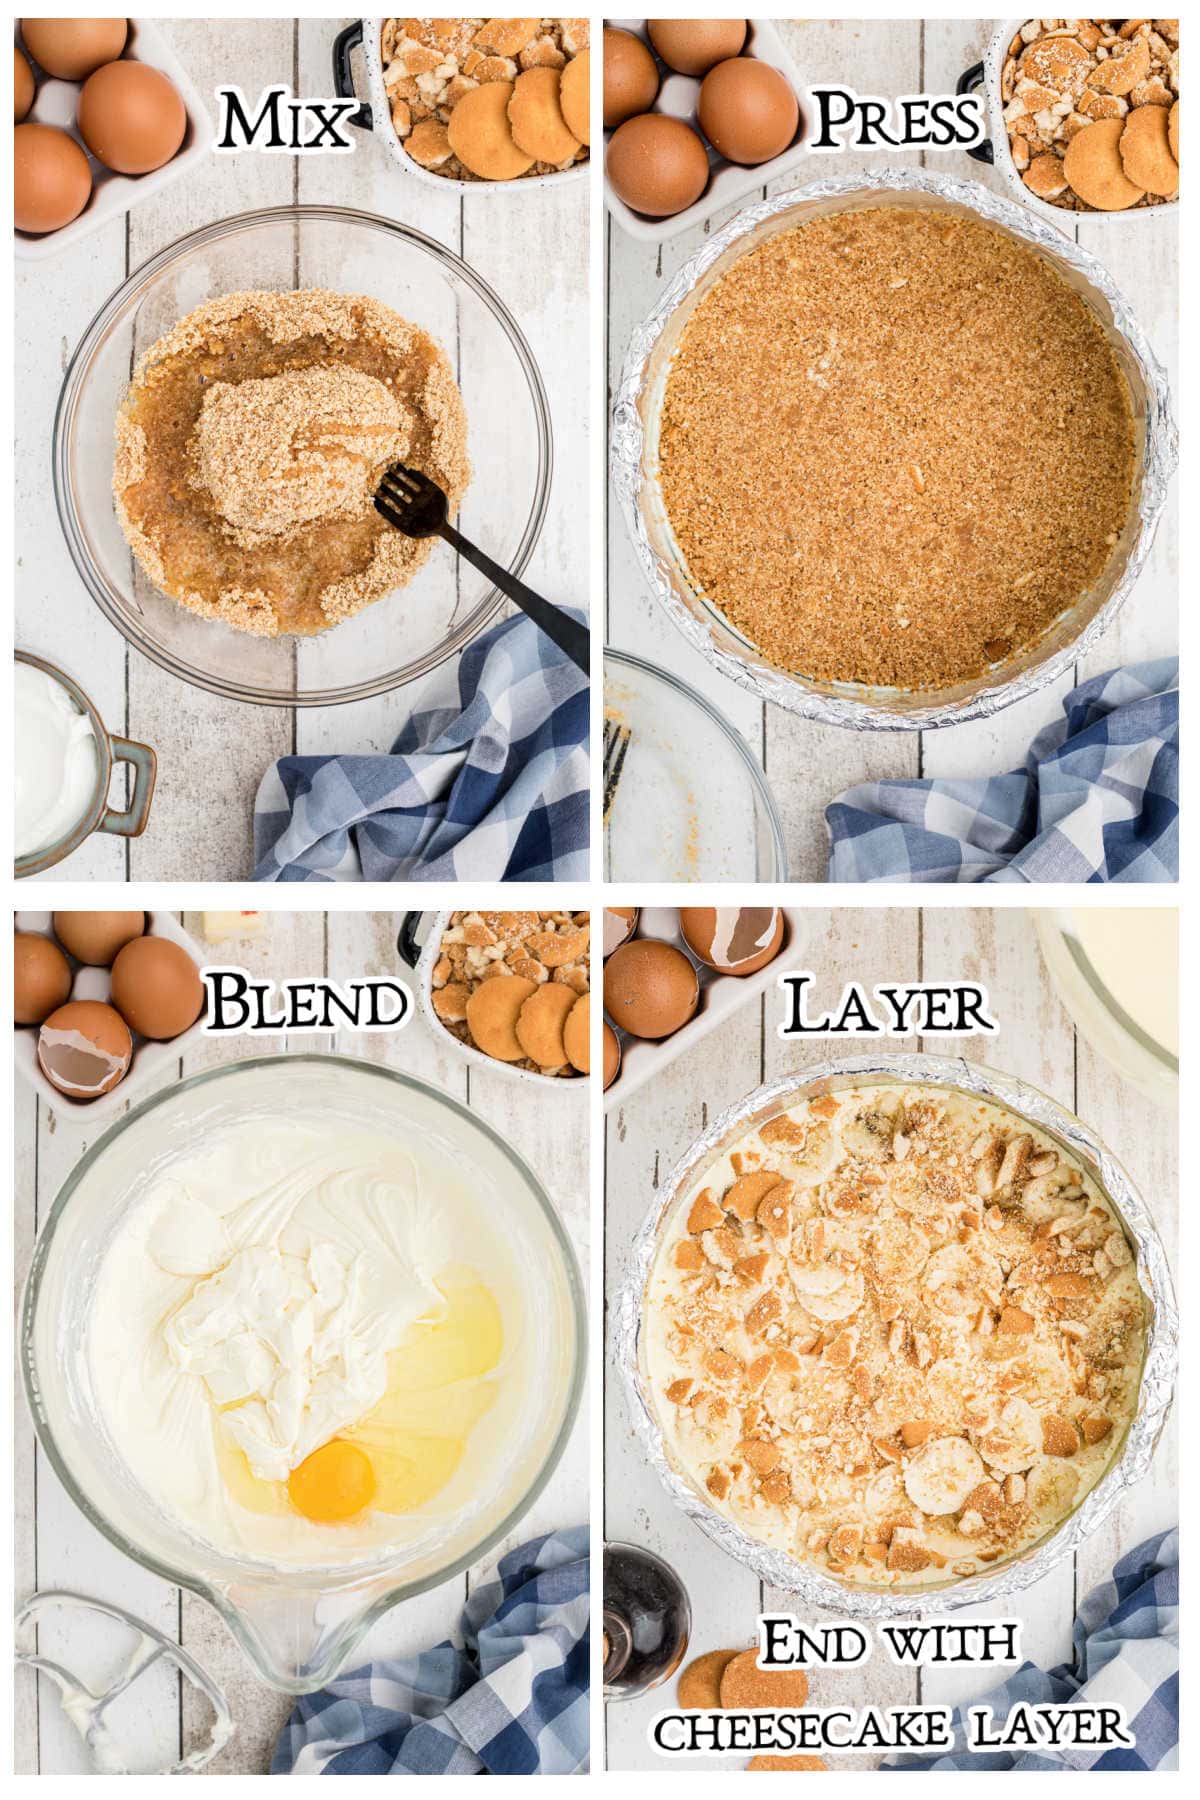 Step by step images showing how to layer the cheesecake.